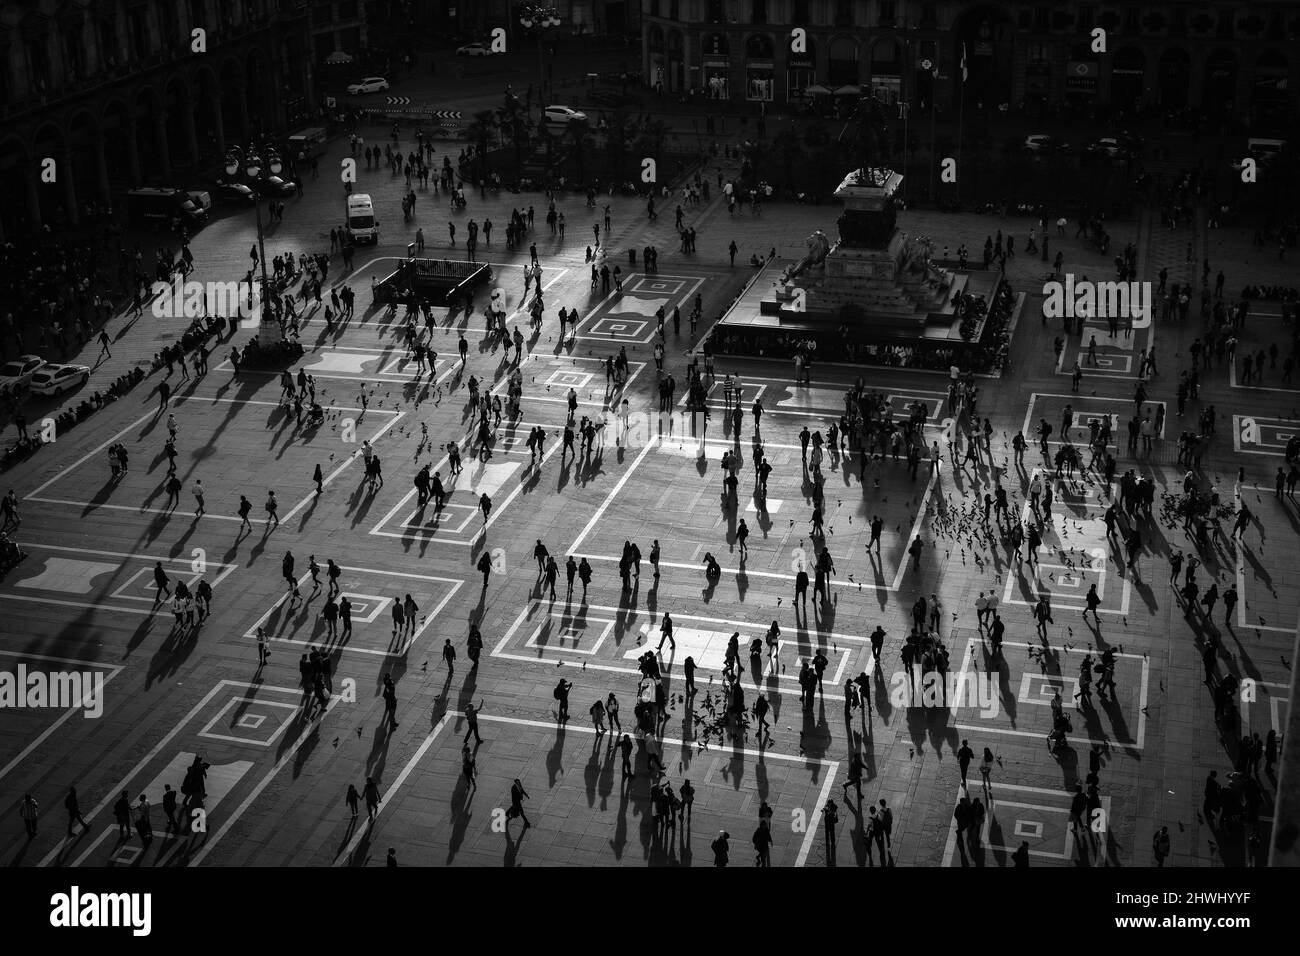 Busy square in Milan, Italy full of people Stock Photo